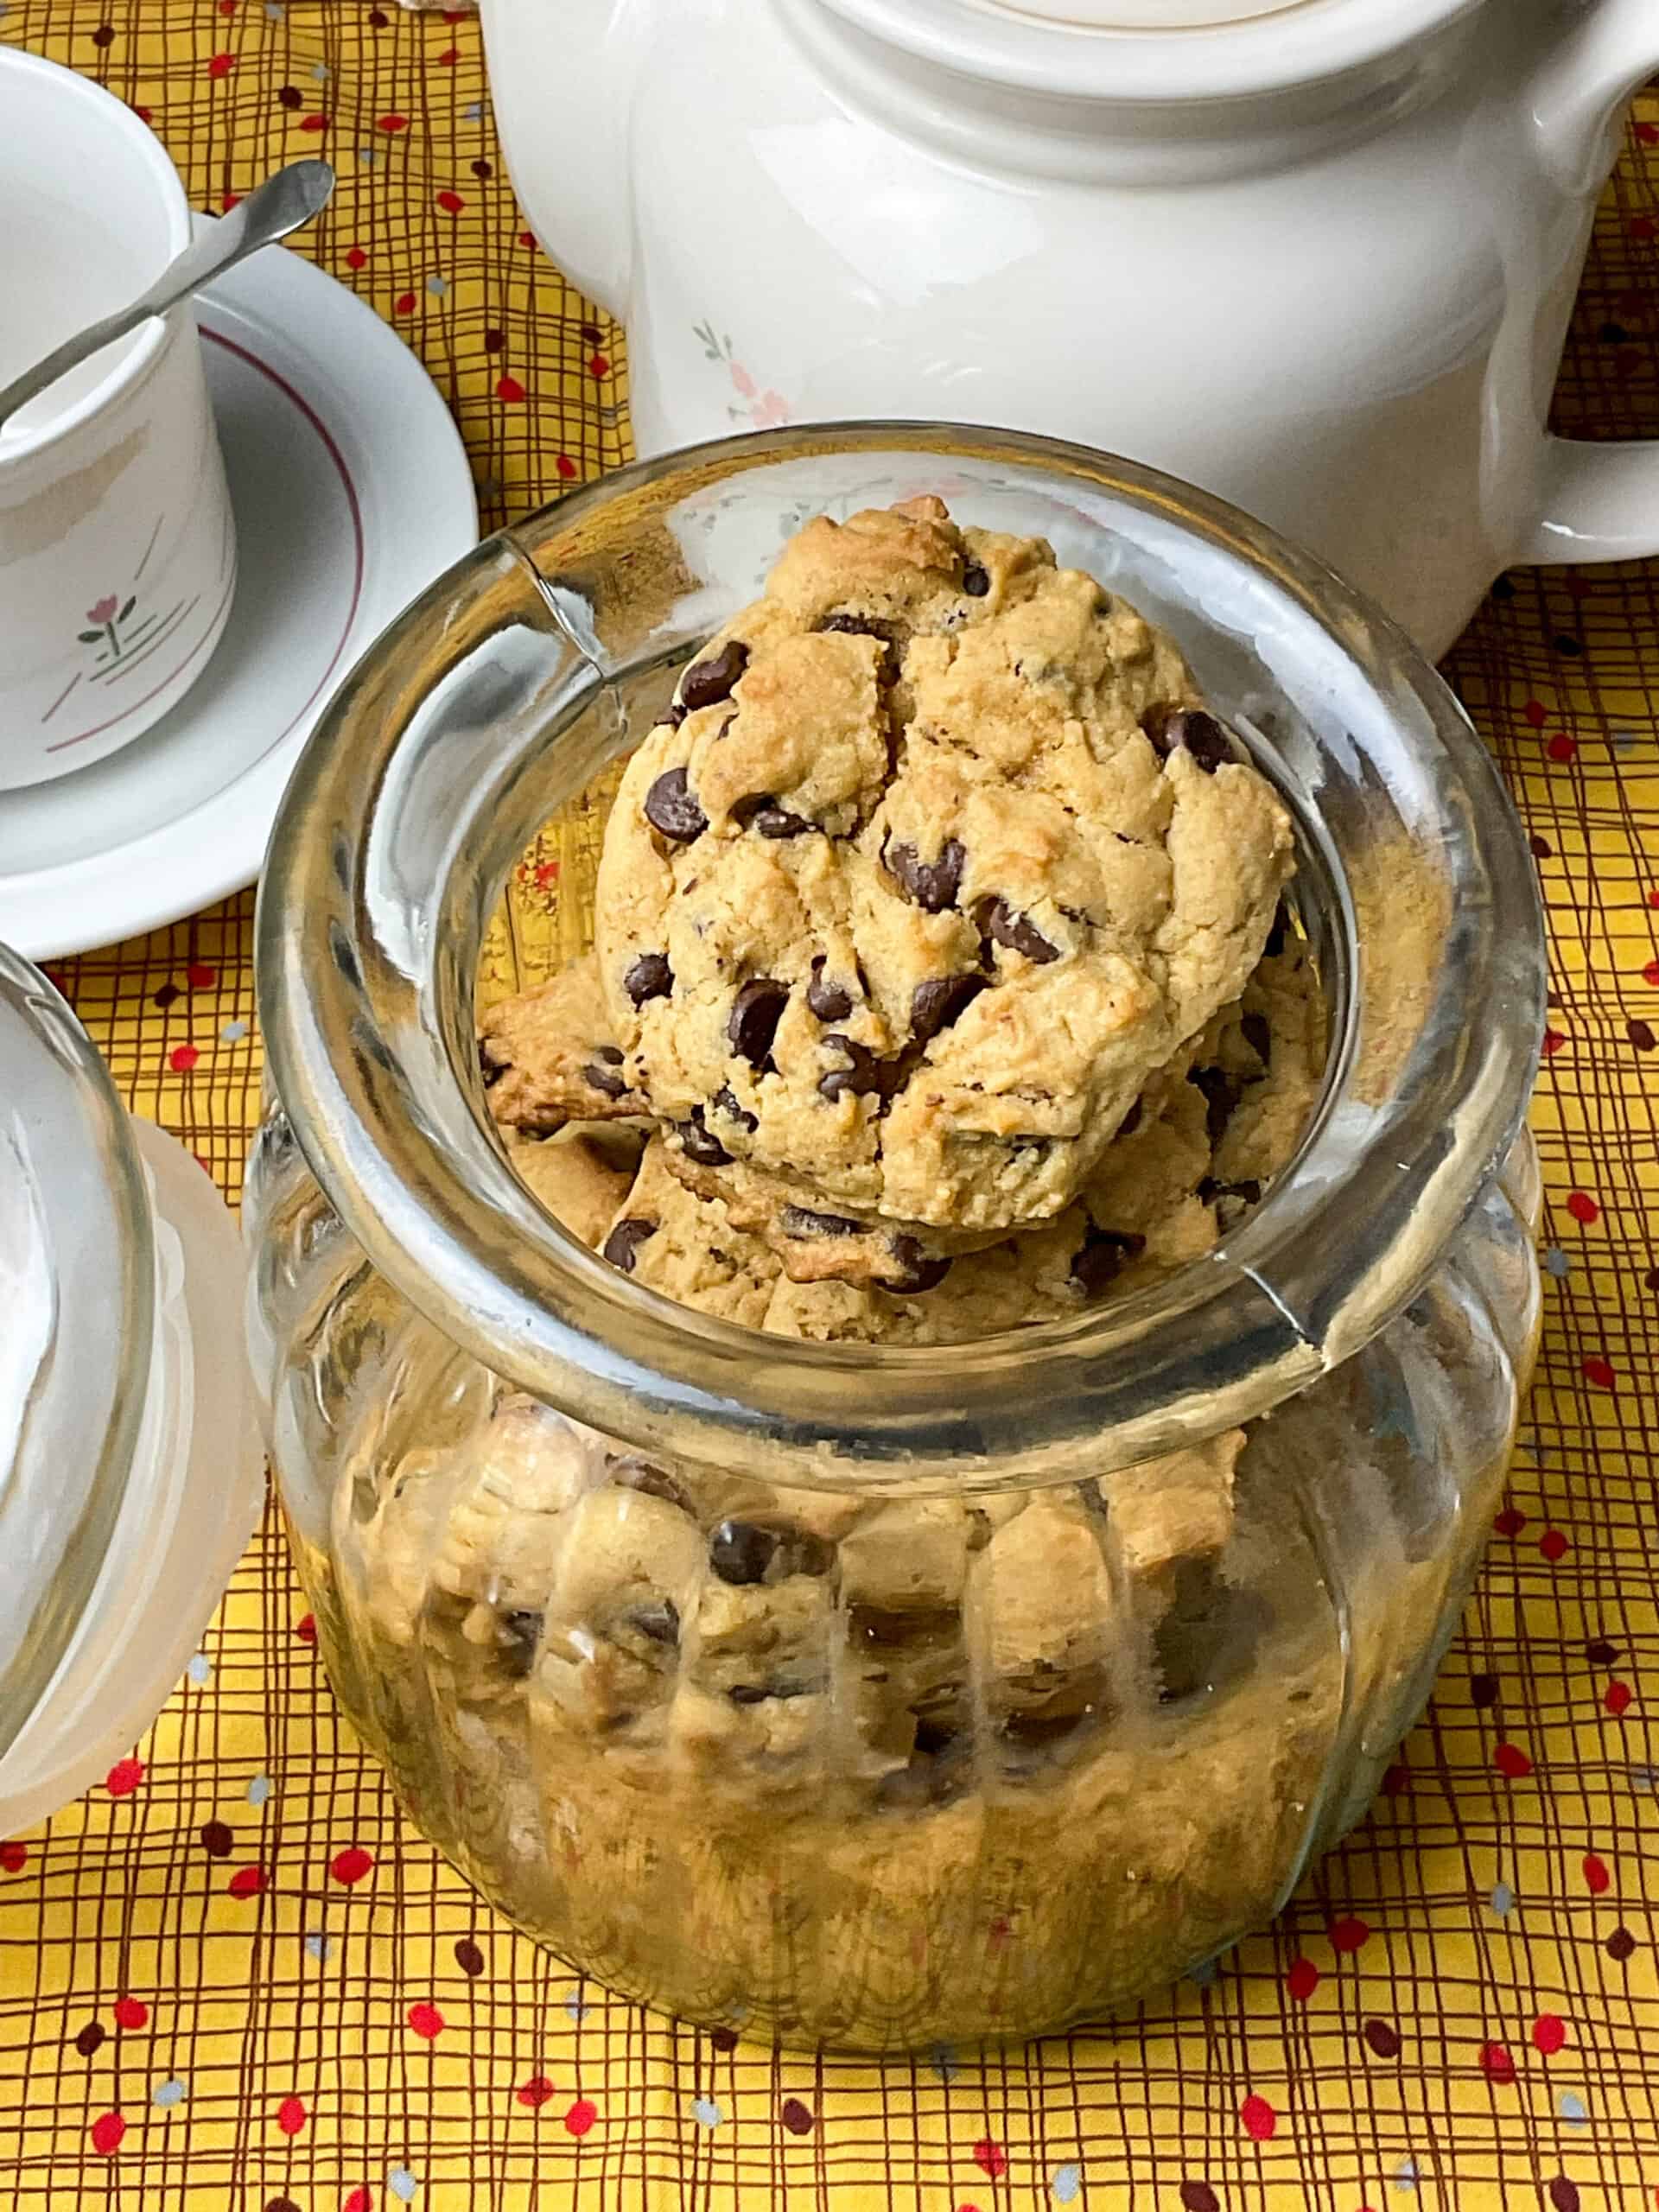 A glass cookie jar filled with chocolate chip cookies, tea pot and cup and saucer to side, and a yellow dotty patterned tablecloth.